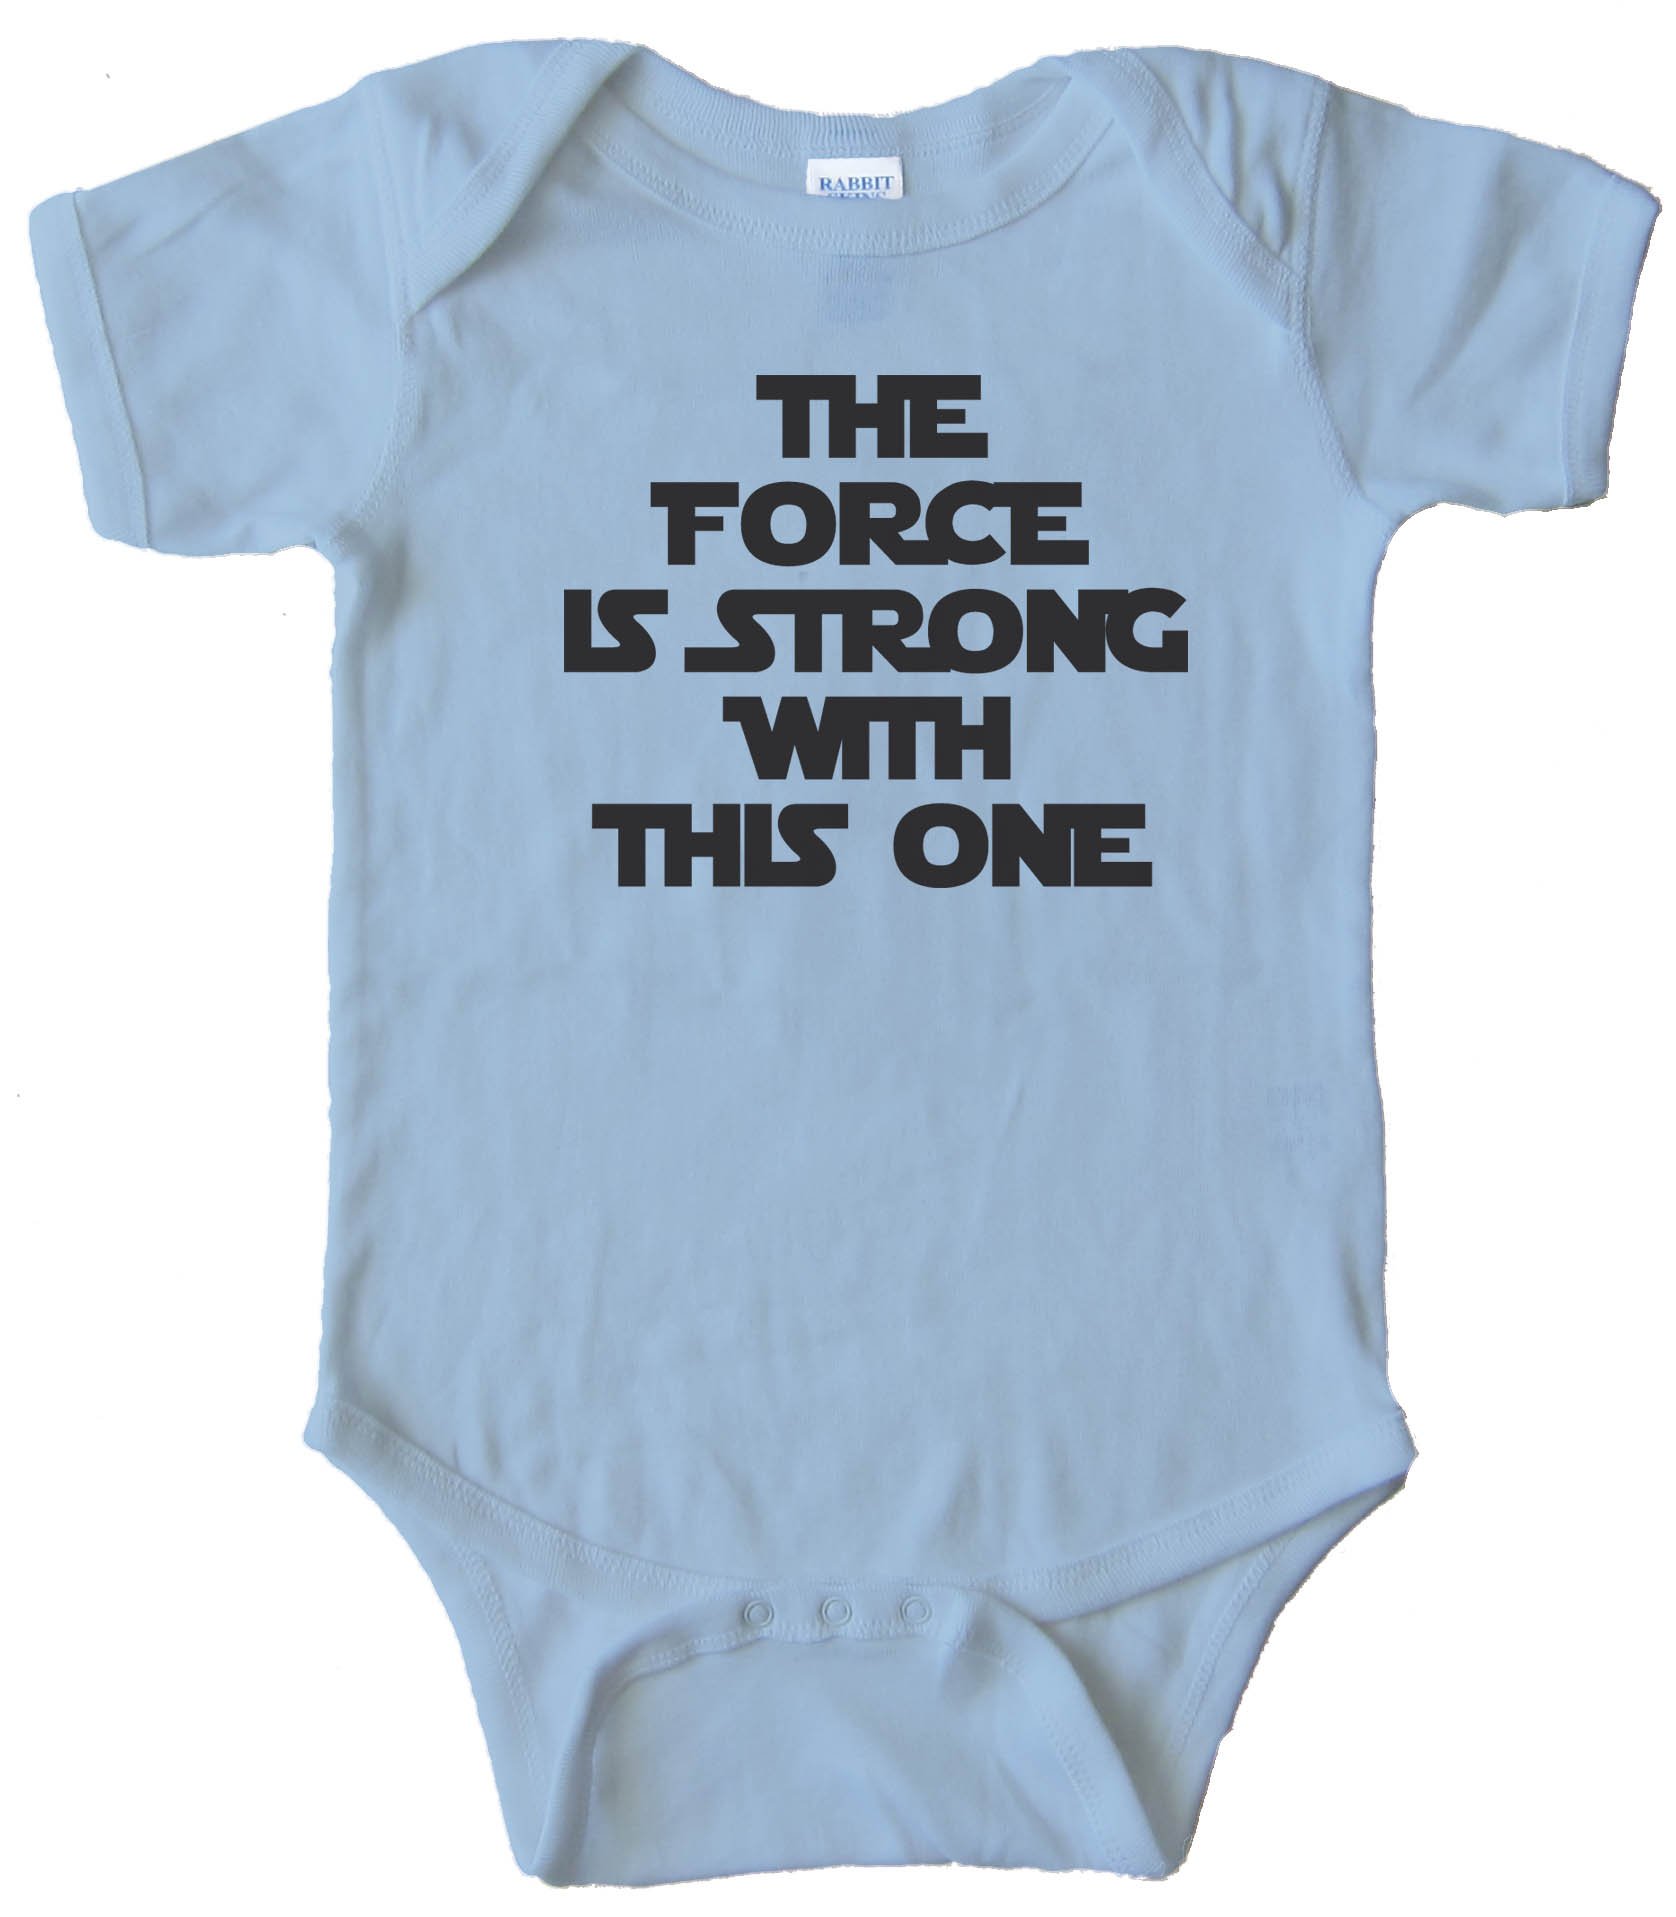 The Force Is Strong With This One - Star Wars - Baby Bodysuit